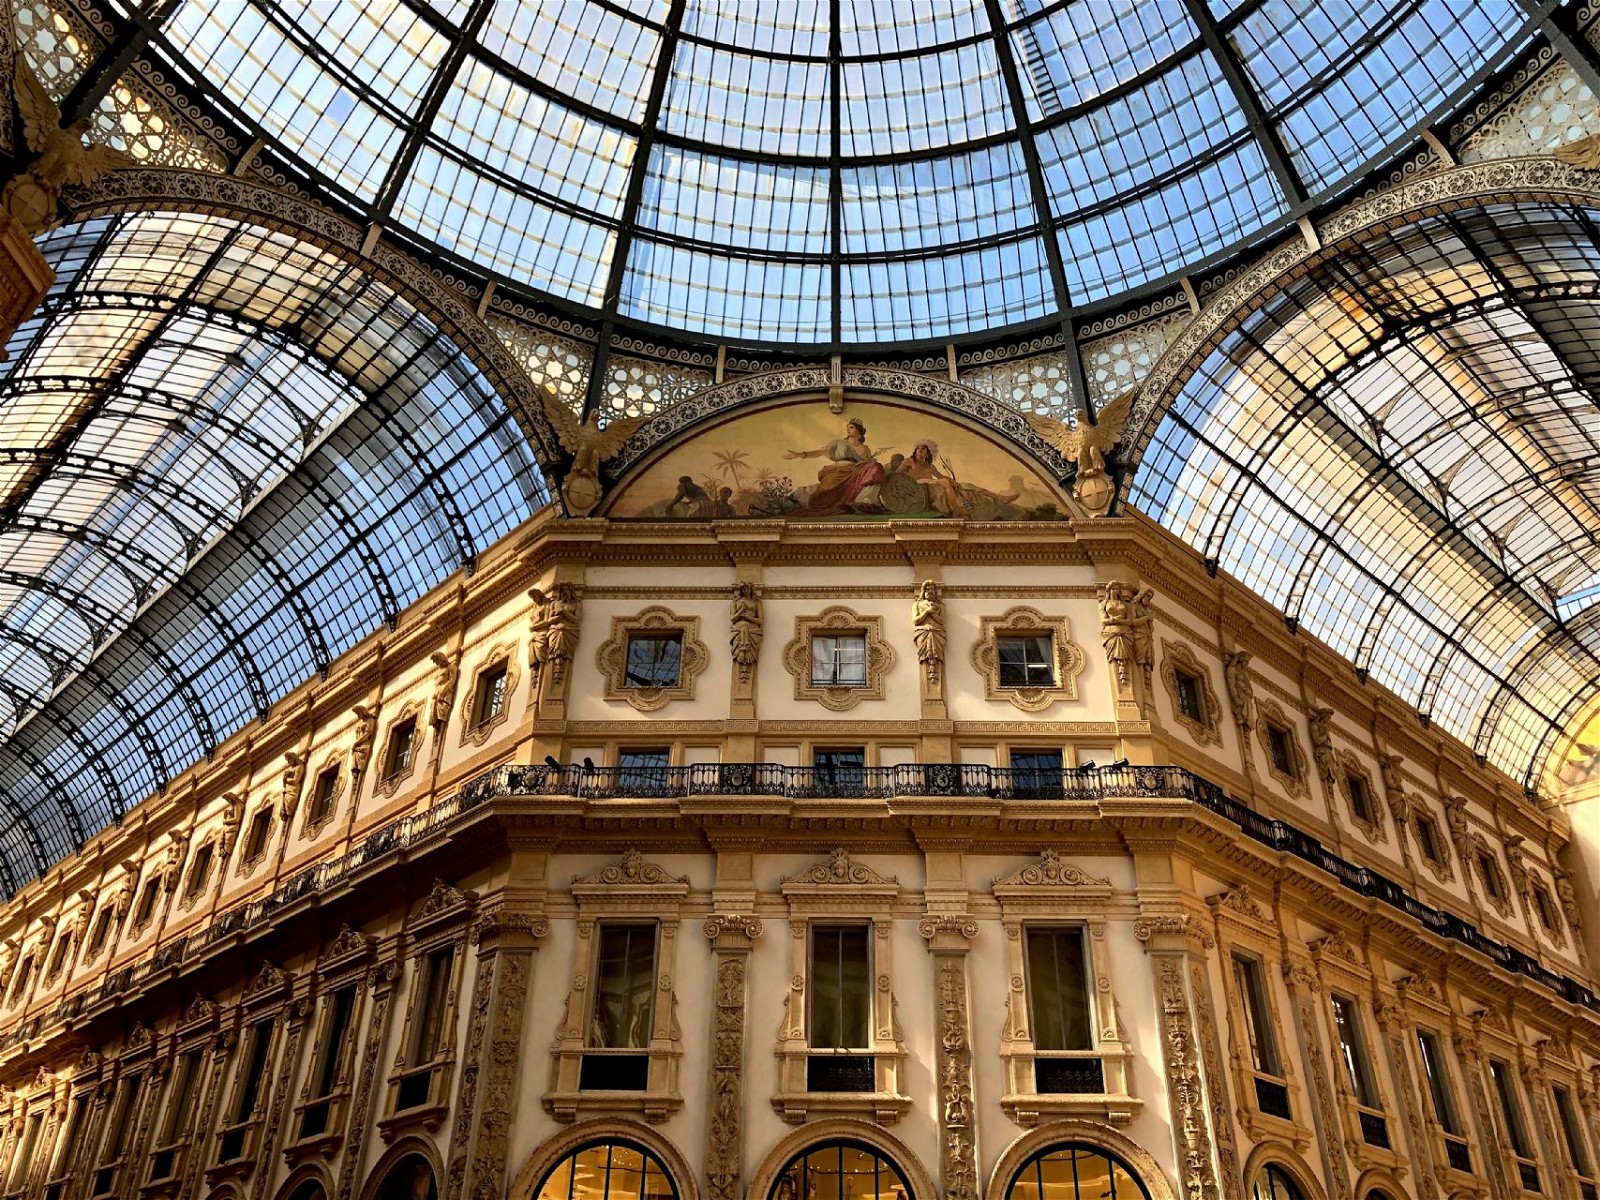 Galleria Vittorio Emanuele II: This elegant shopping arcade is one of the world's oldest and most beautiful shopping centers